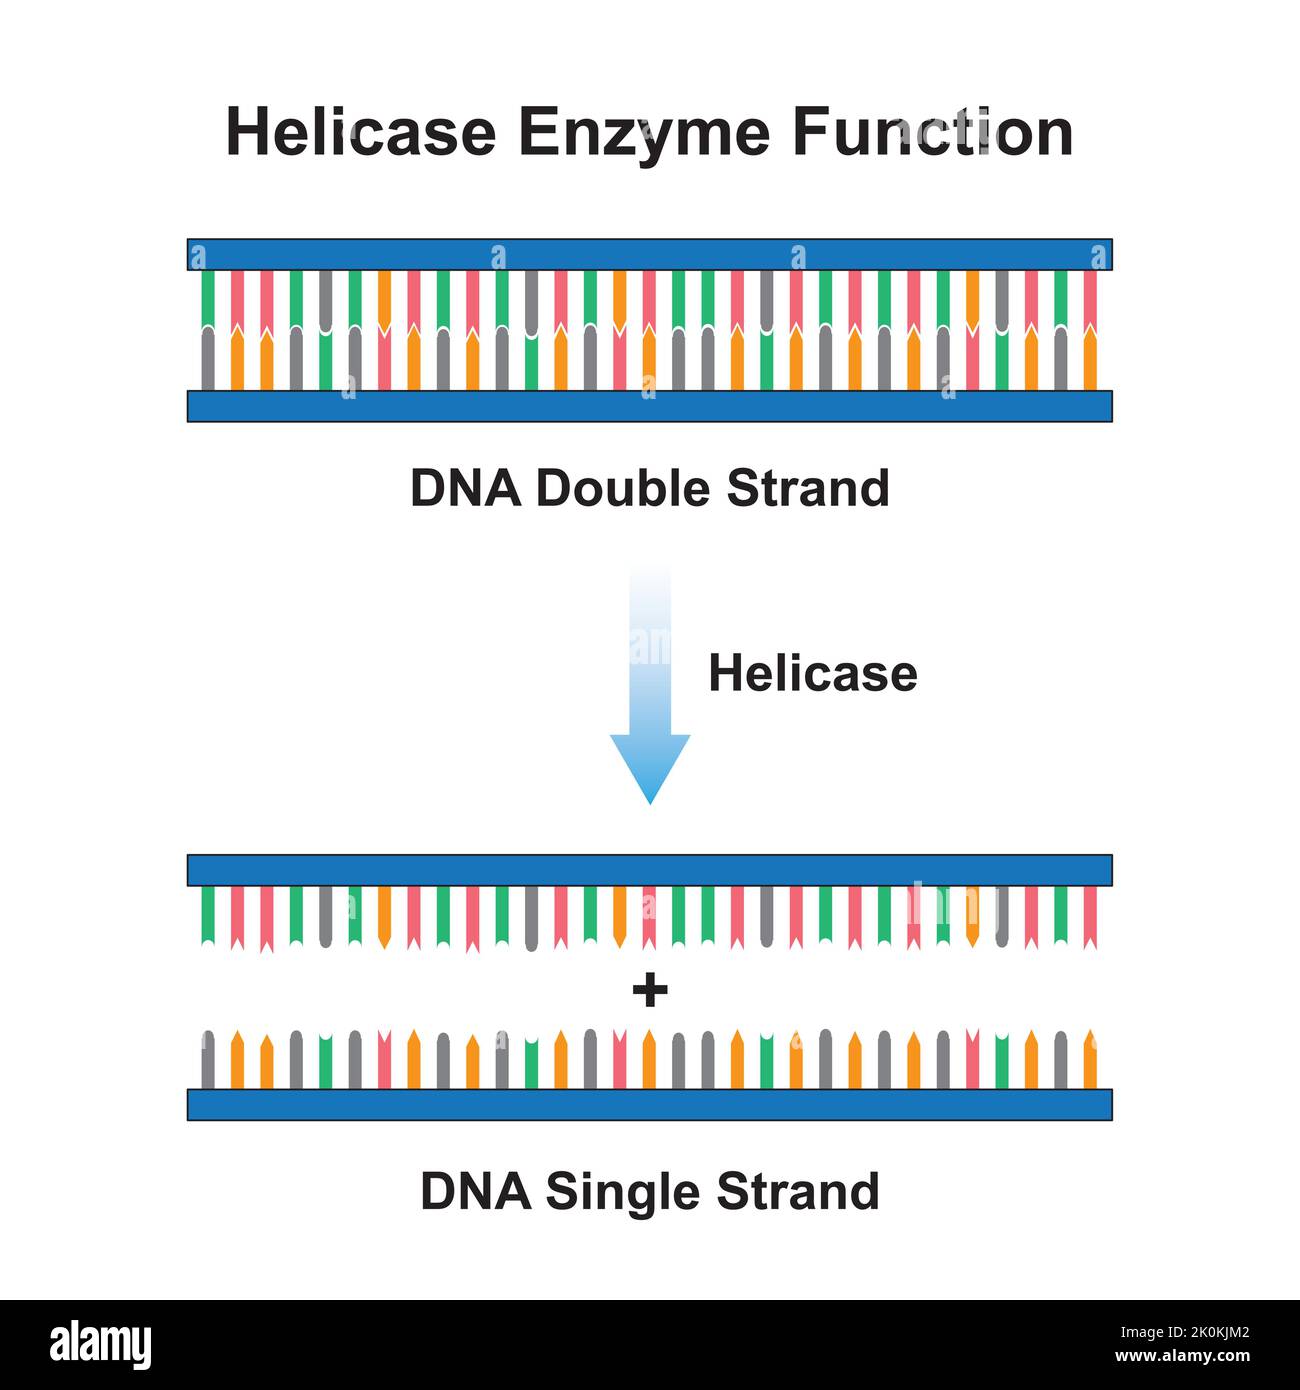 Scientific Designing of Helicase Enzyme Effect on DNA Molecule. From DNA Double Strand to DNA Single Strand. Colorful Symbols. Vector Illustration. Stock Vector